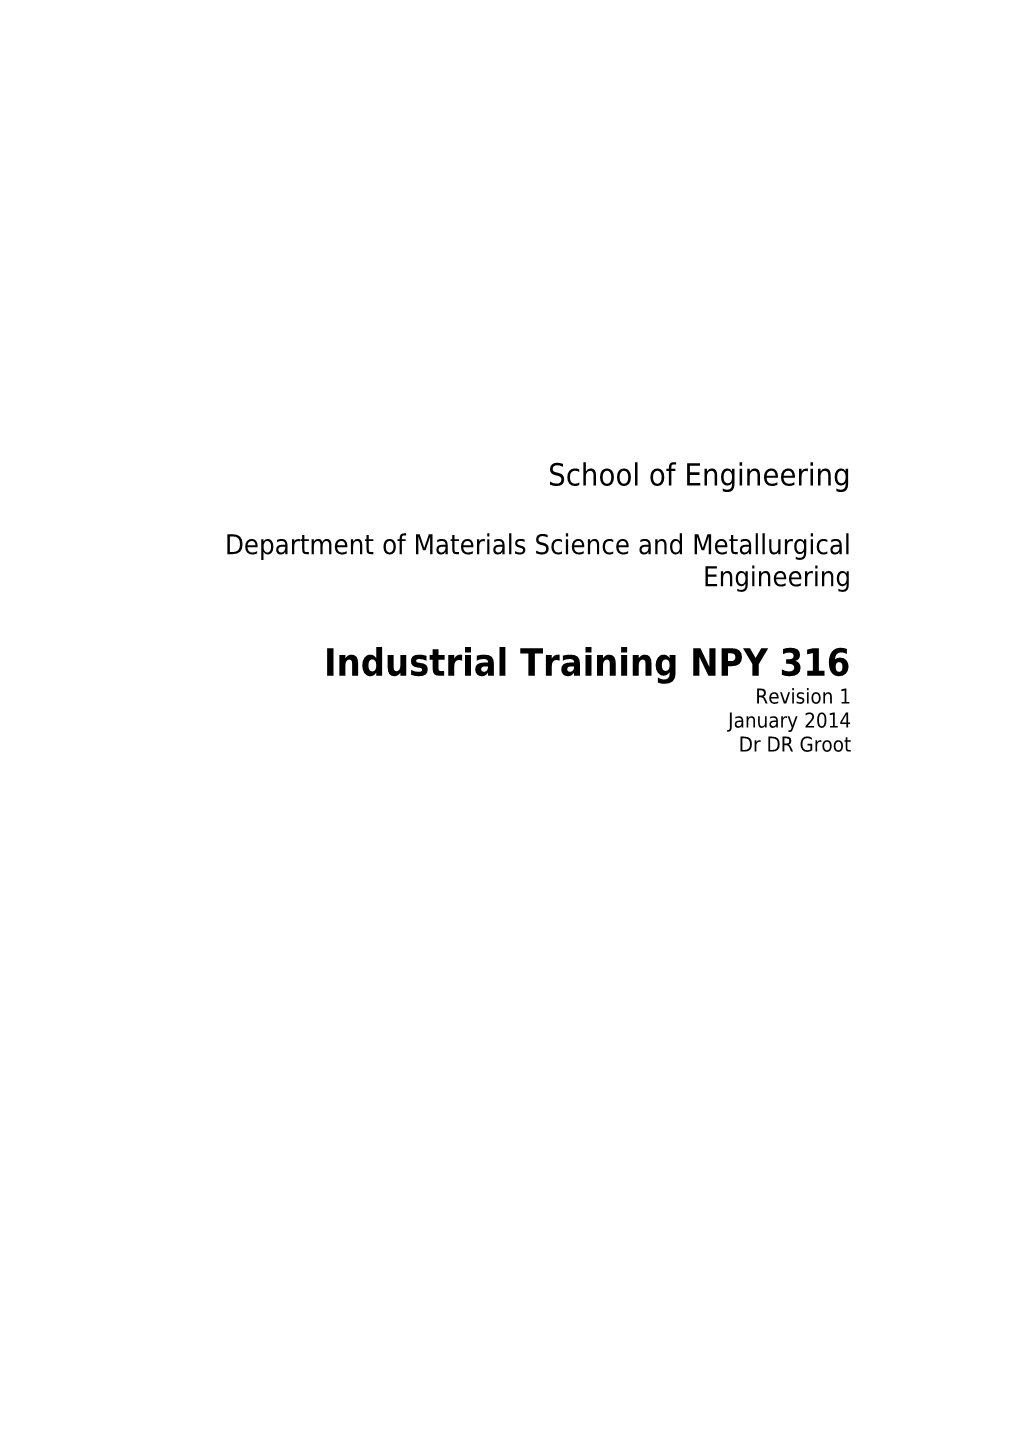 Department of Materials Science and Metallurgical Engineering